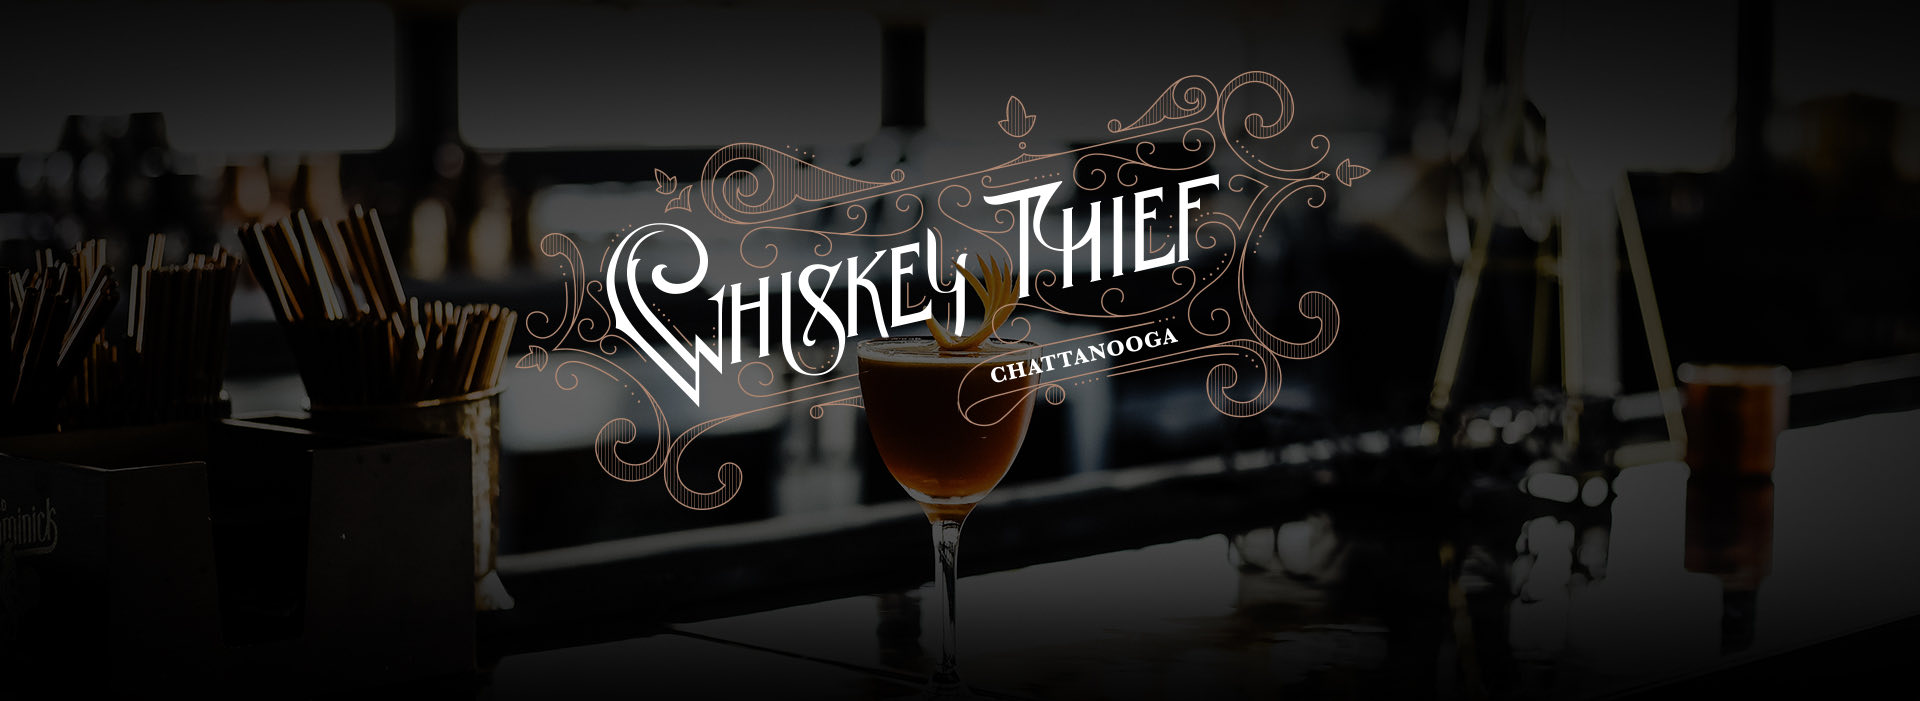 whiskey thief logo with dark image of a bar counter and a cocktail